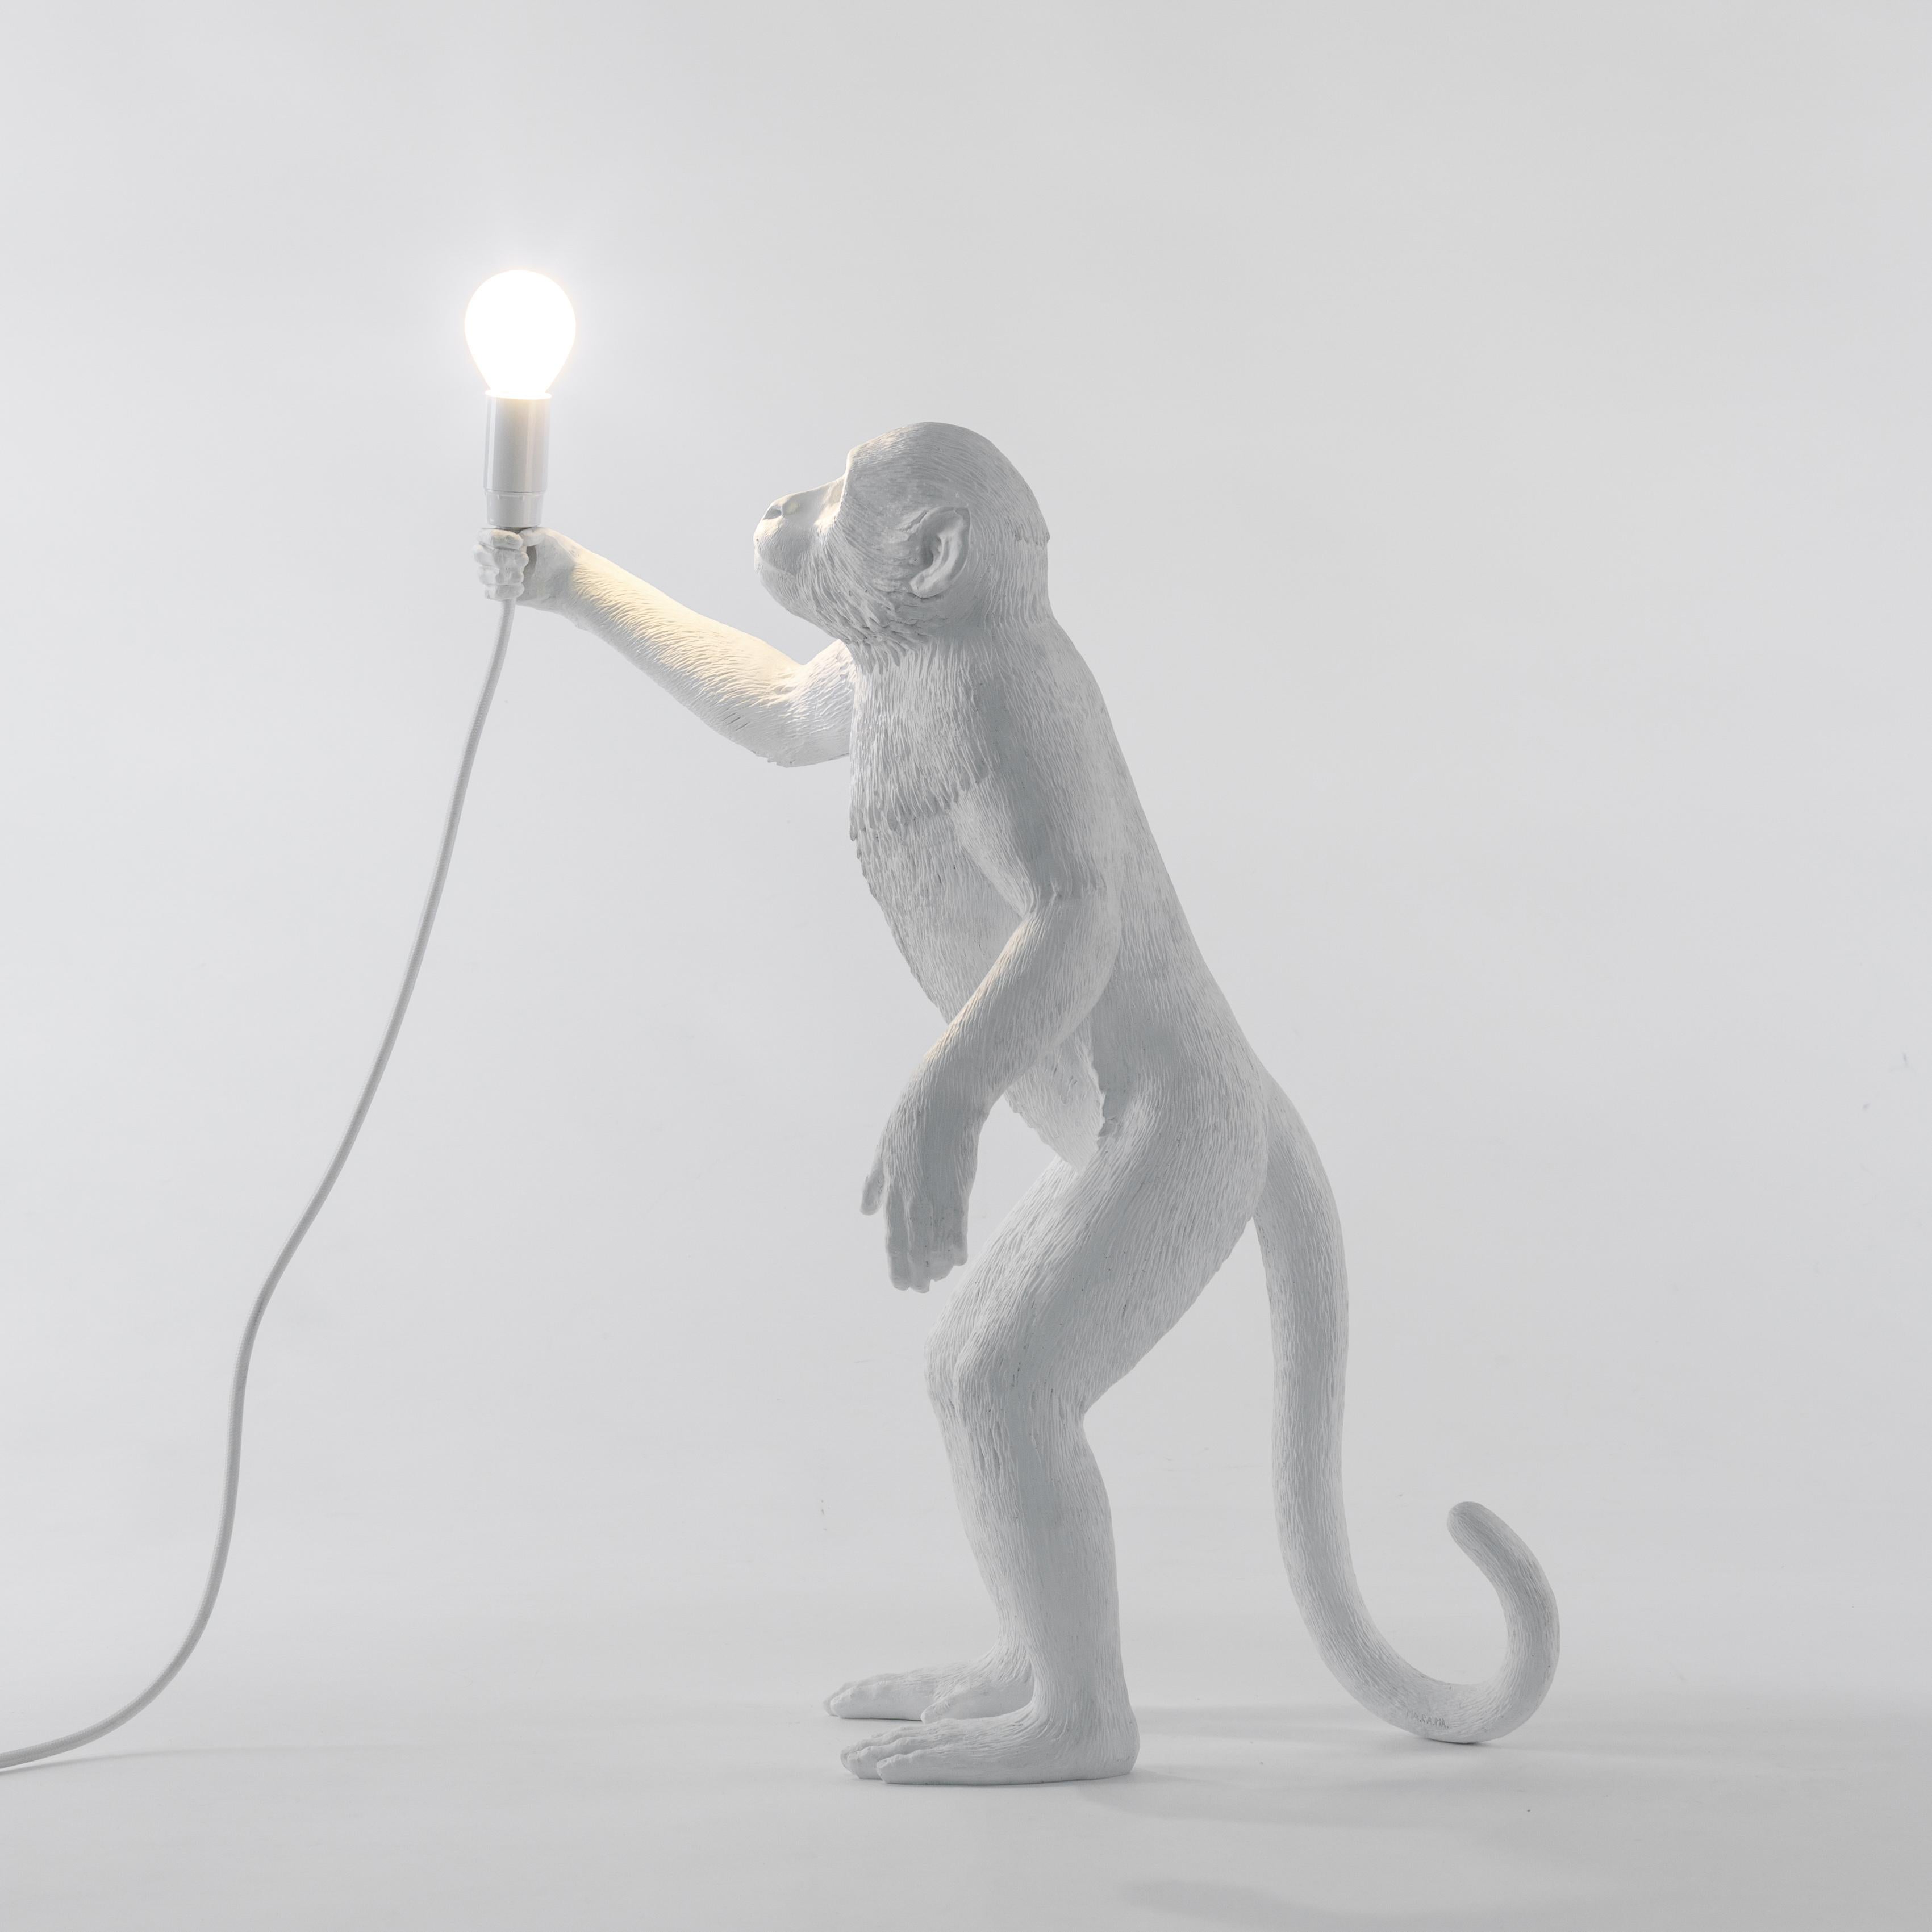 A mischievous monkey stole your light and now it’s up to you to get it back. This white resin lamp designed by Marcantonio makes you feel just like in a safari, lost in the deep black Africa.

- Standing lamp
- Size: cm. 46 × 27.5 H 54
- For